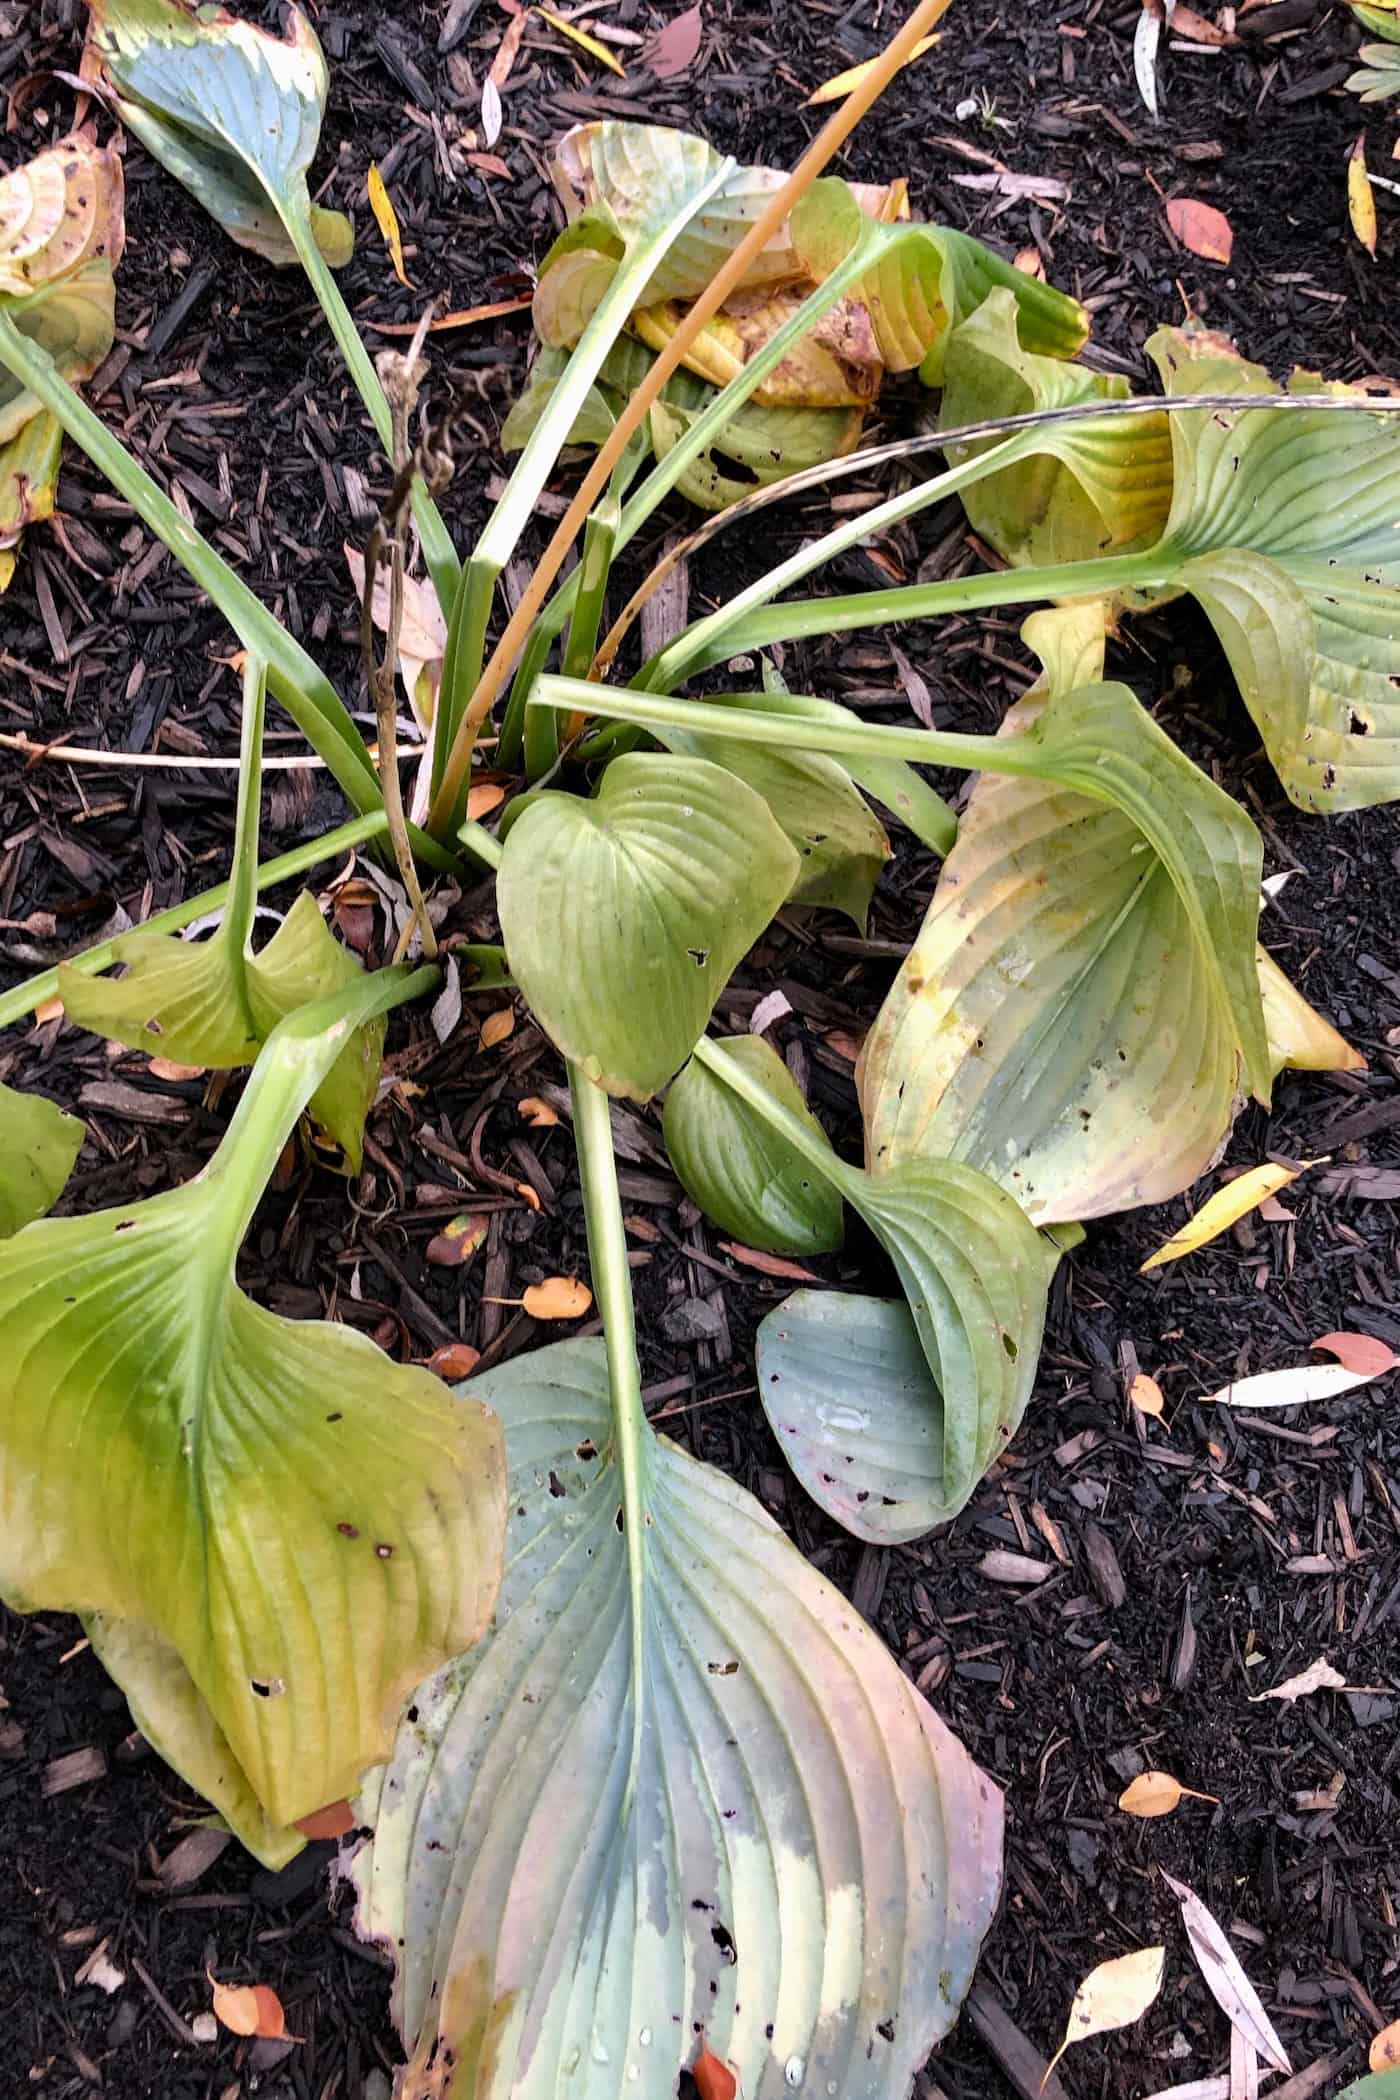 Hosta leaves killed by frost in october